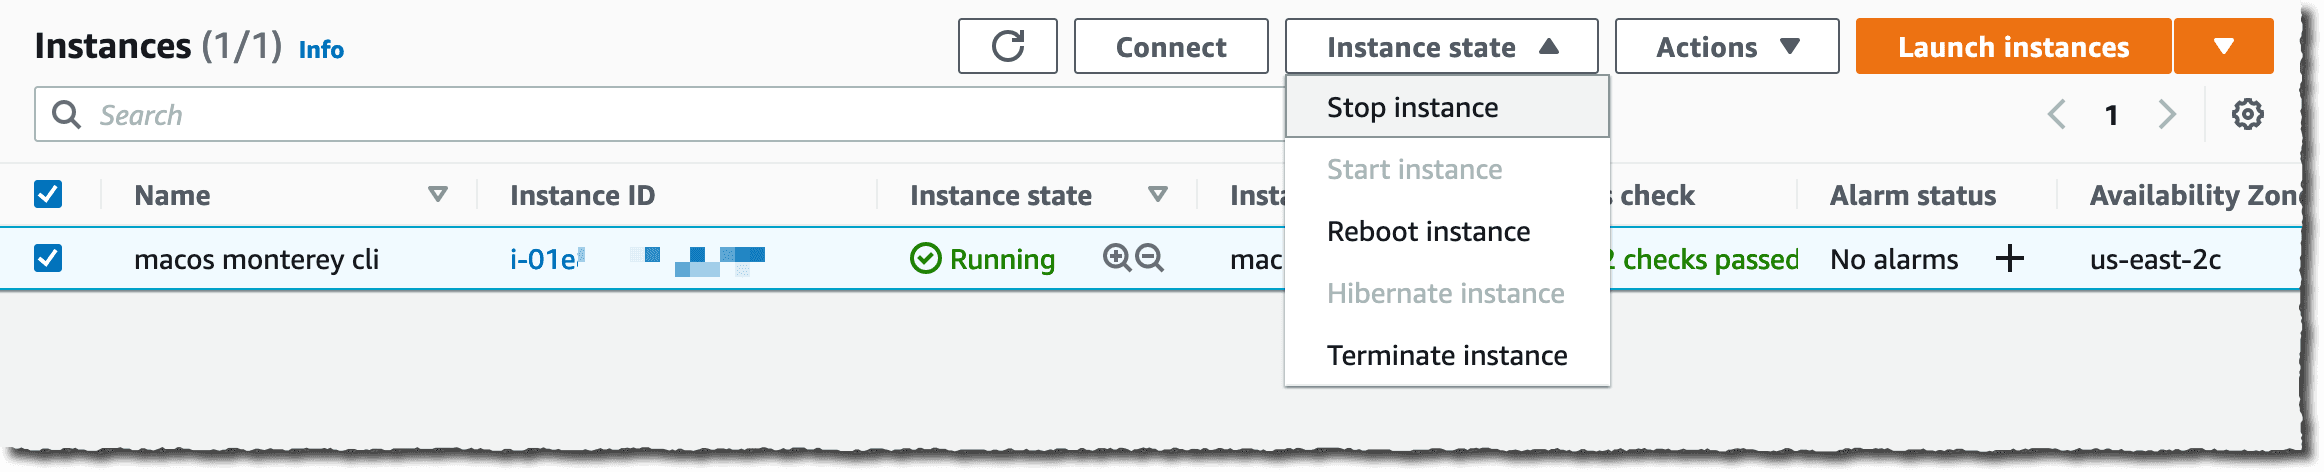 EC2 Instance state menu with stop, reboot, and terminate